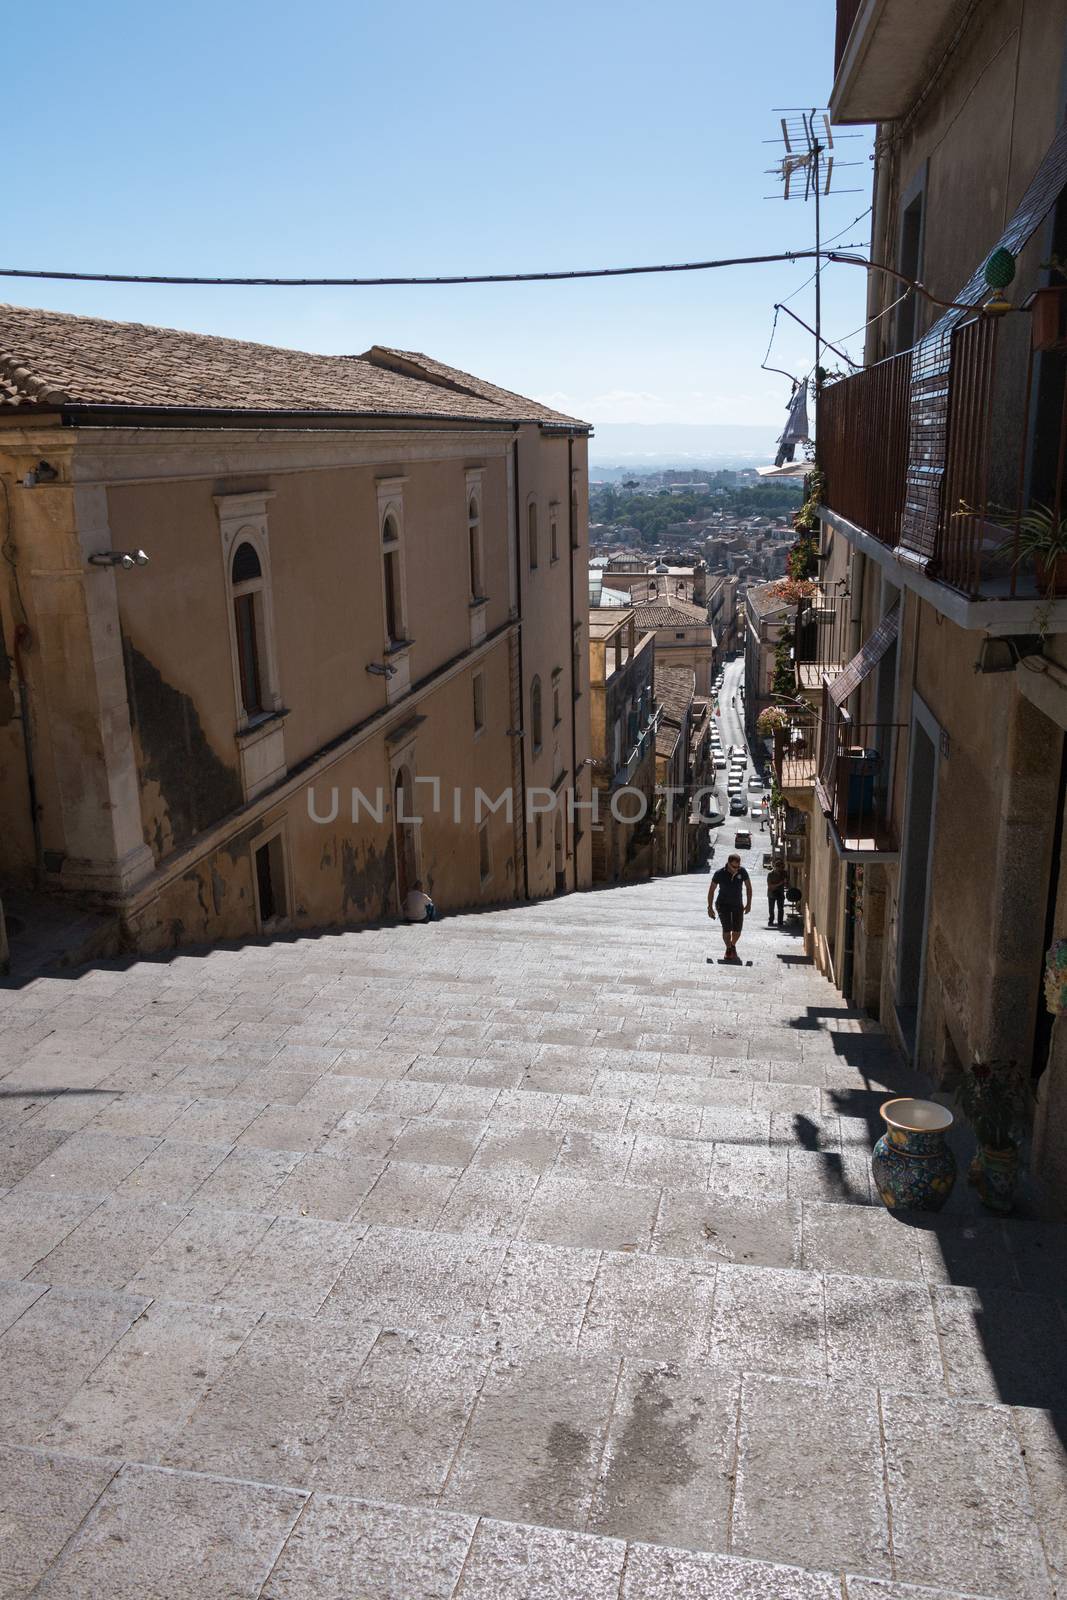 Famous staircase of Caltagirone in Sicily known for its ceramics